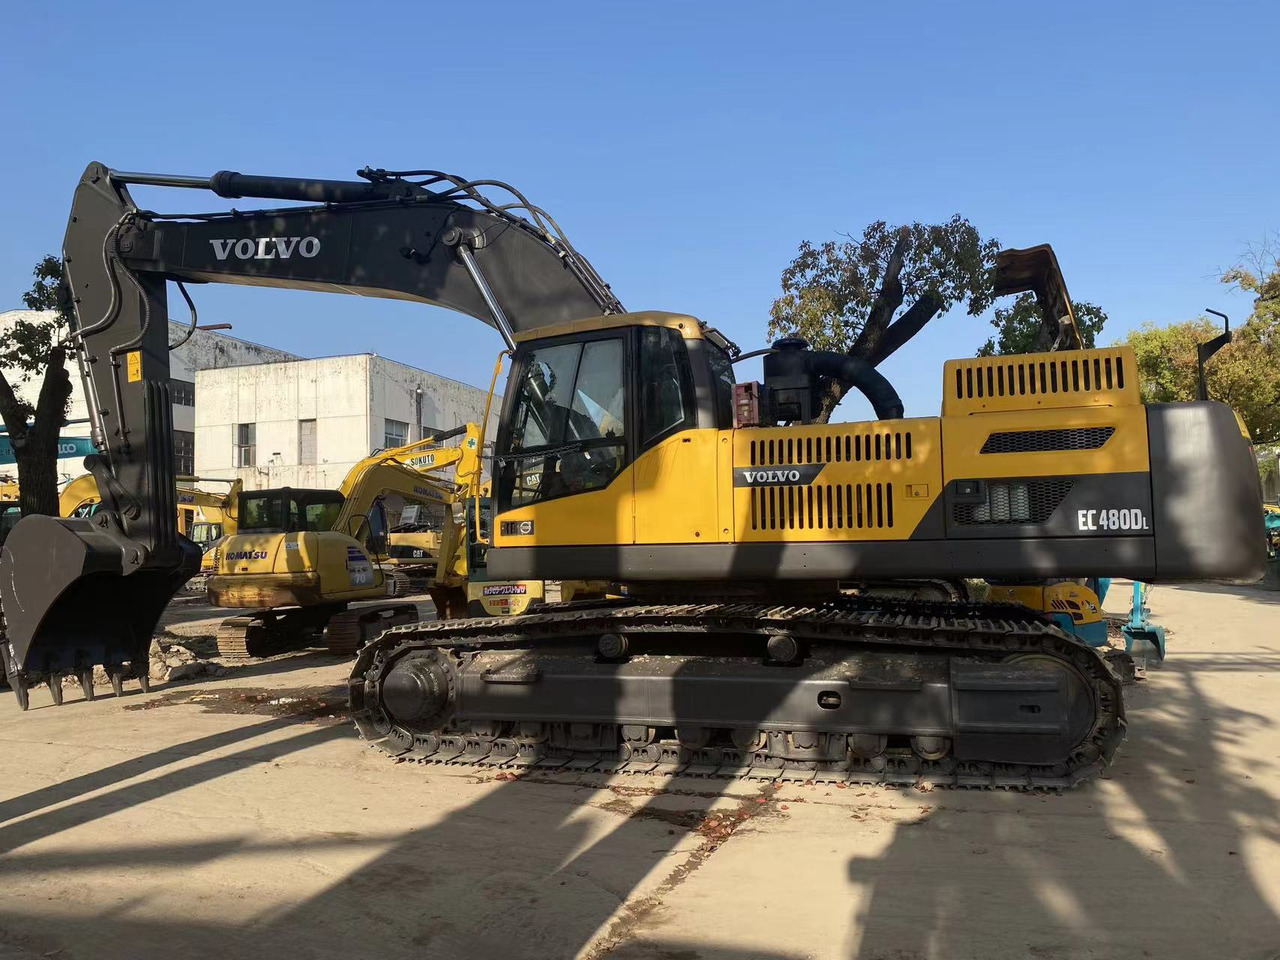 Hot selling original made Used excavator VOLVO EC480DL in stock low price for sale lizing Hot selling original made Used excavator VOLVO EC480DL in stock low price for sale: slika 3